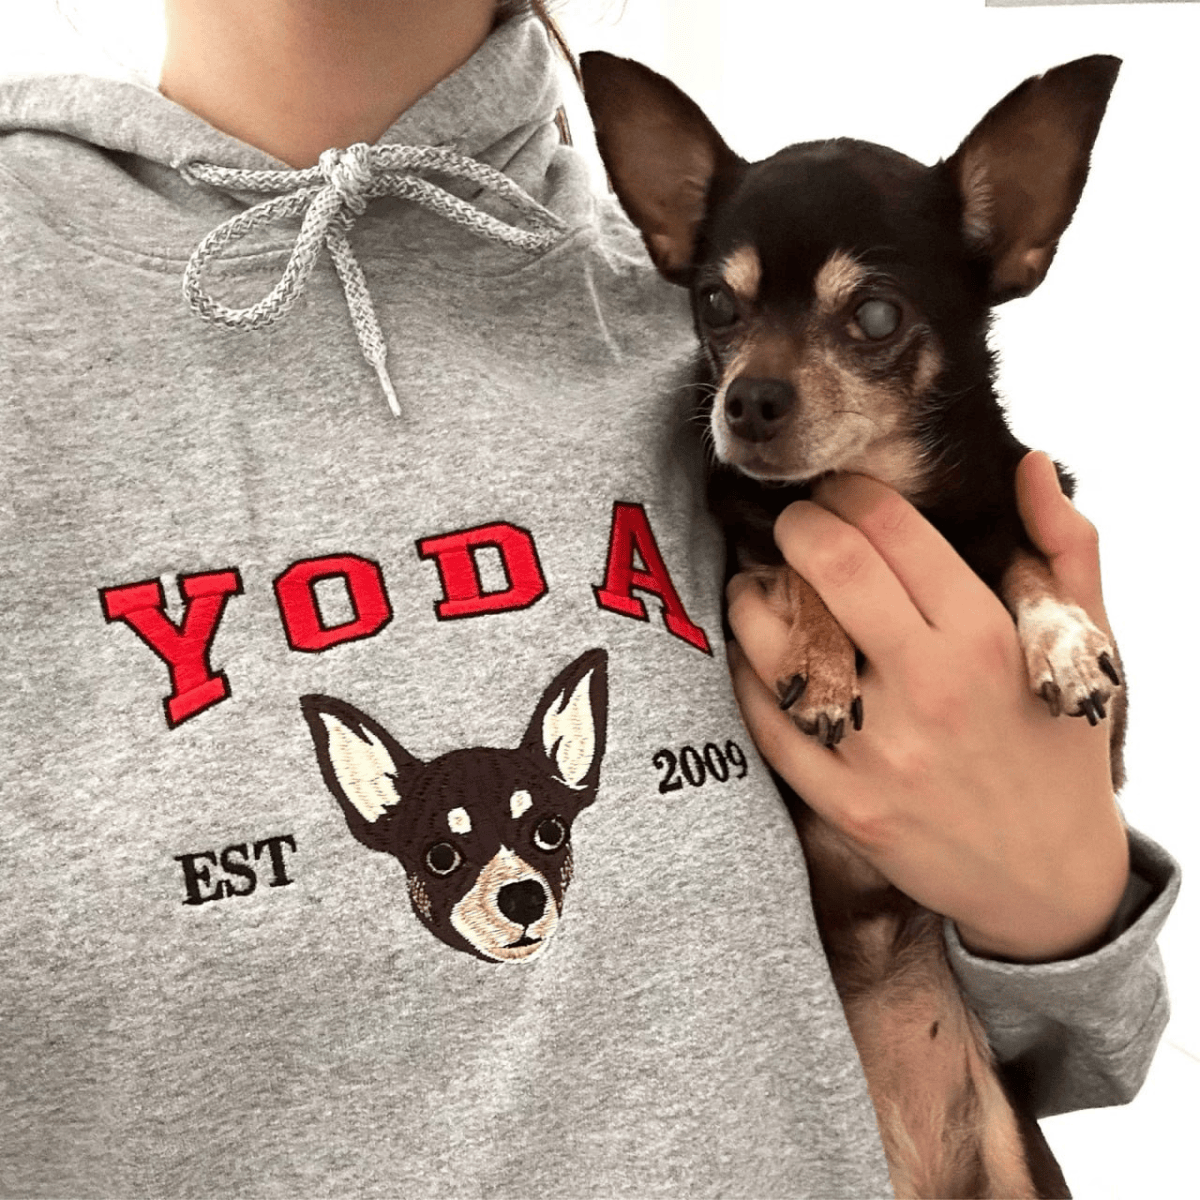 Custom Embroidered Sweatshirt with Dog Face Varsity from Photo, Gift for Dog Lovers